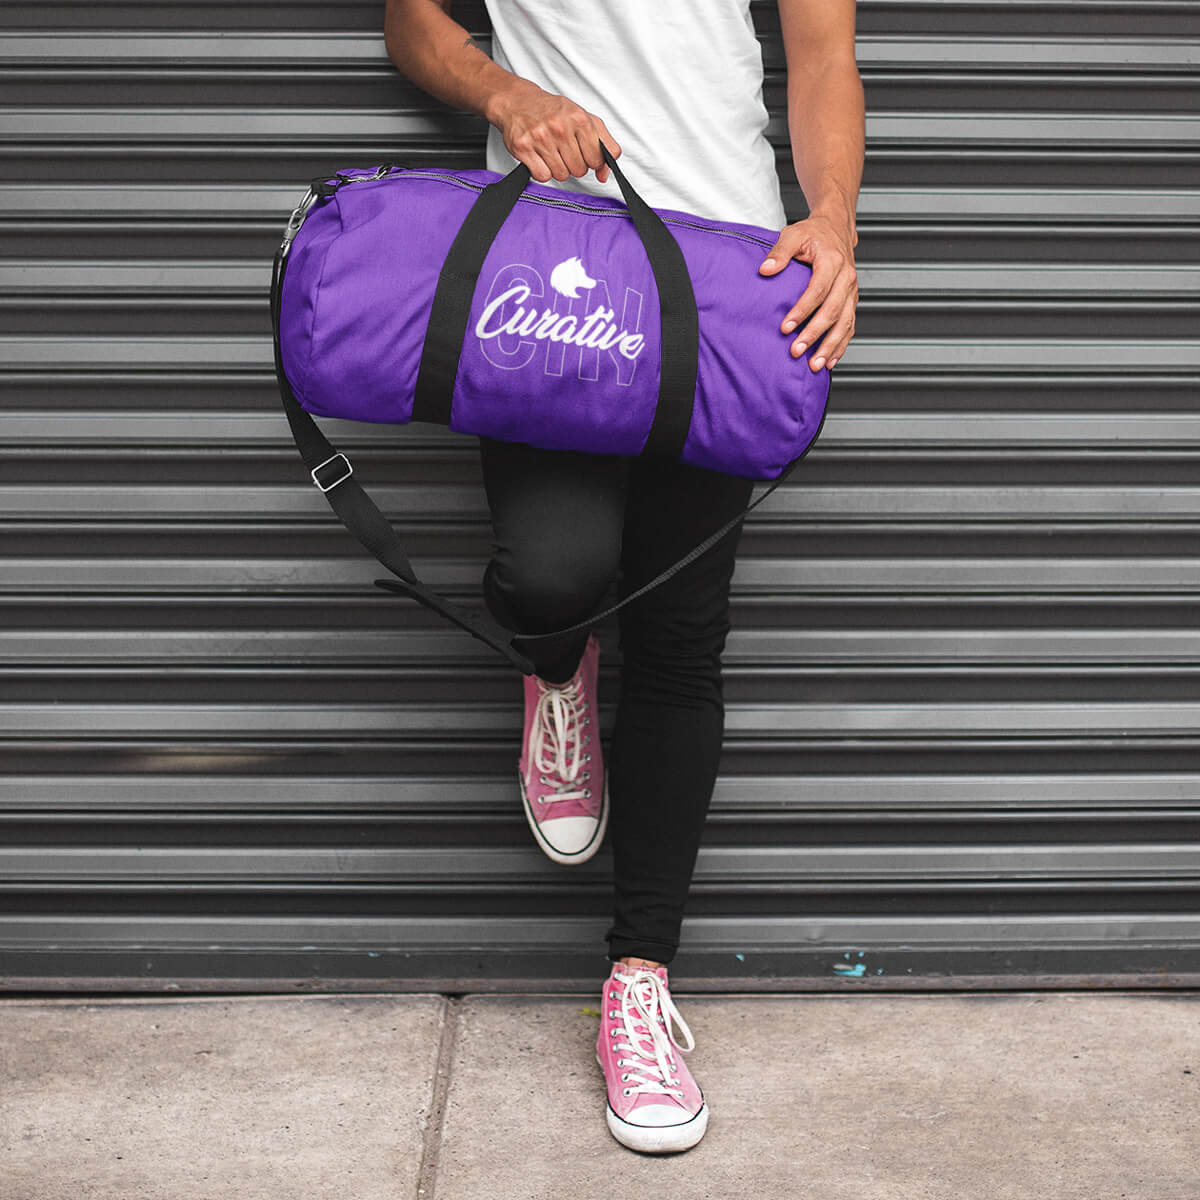 Trendy guy with purple custom promotional duffle bags by curative printing